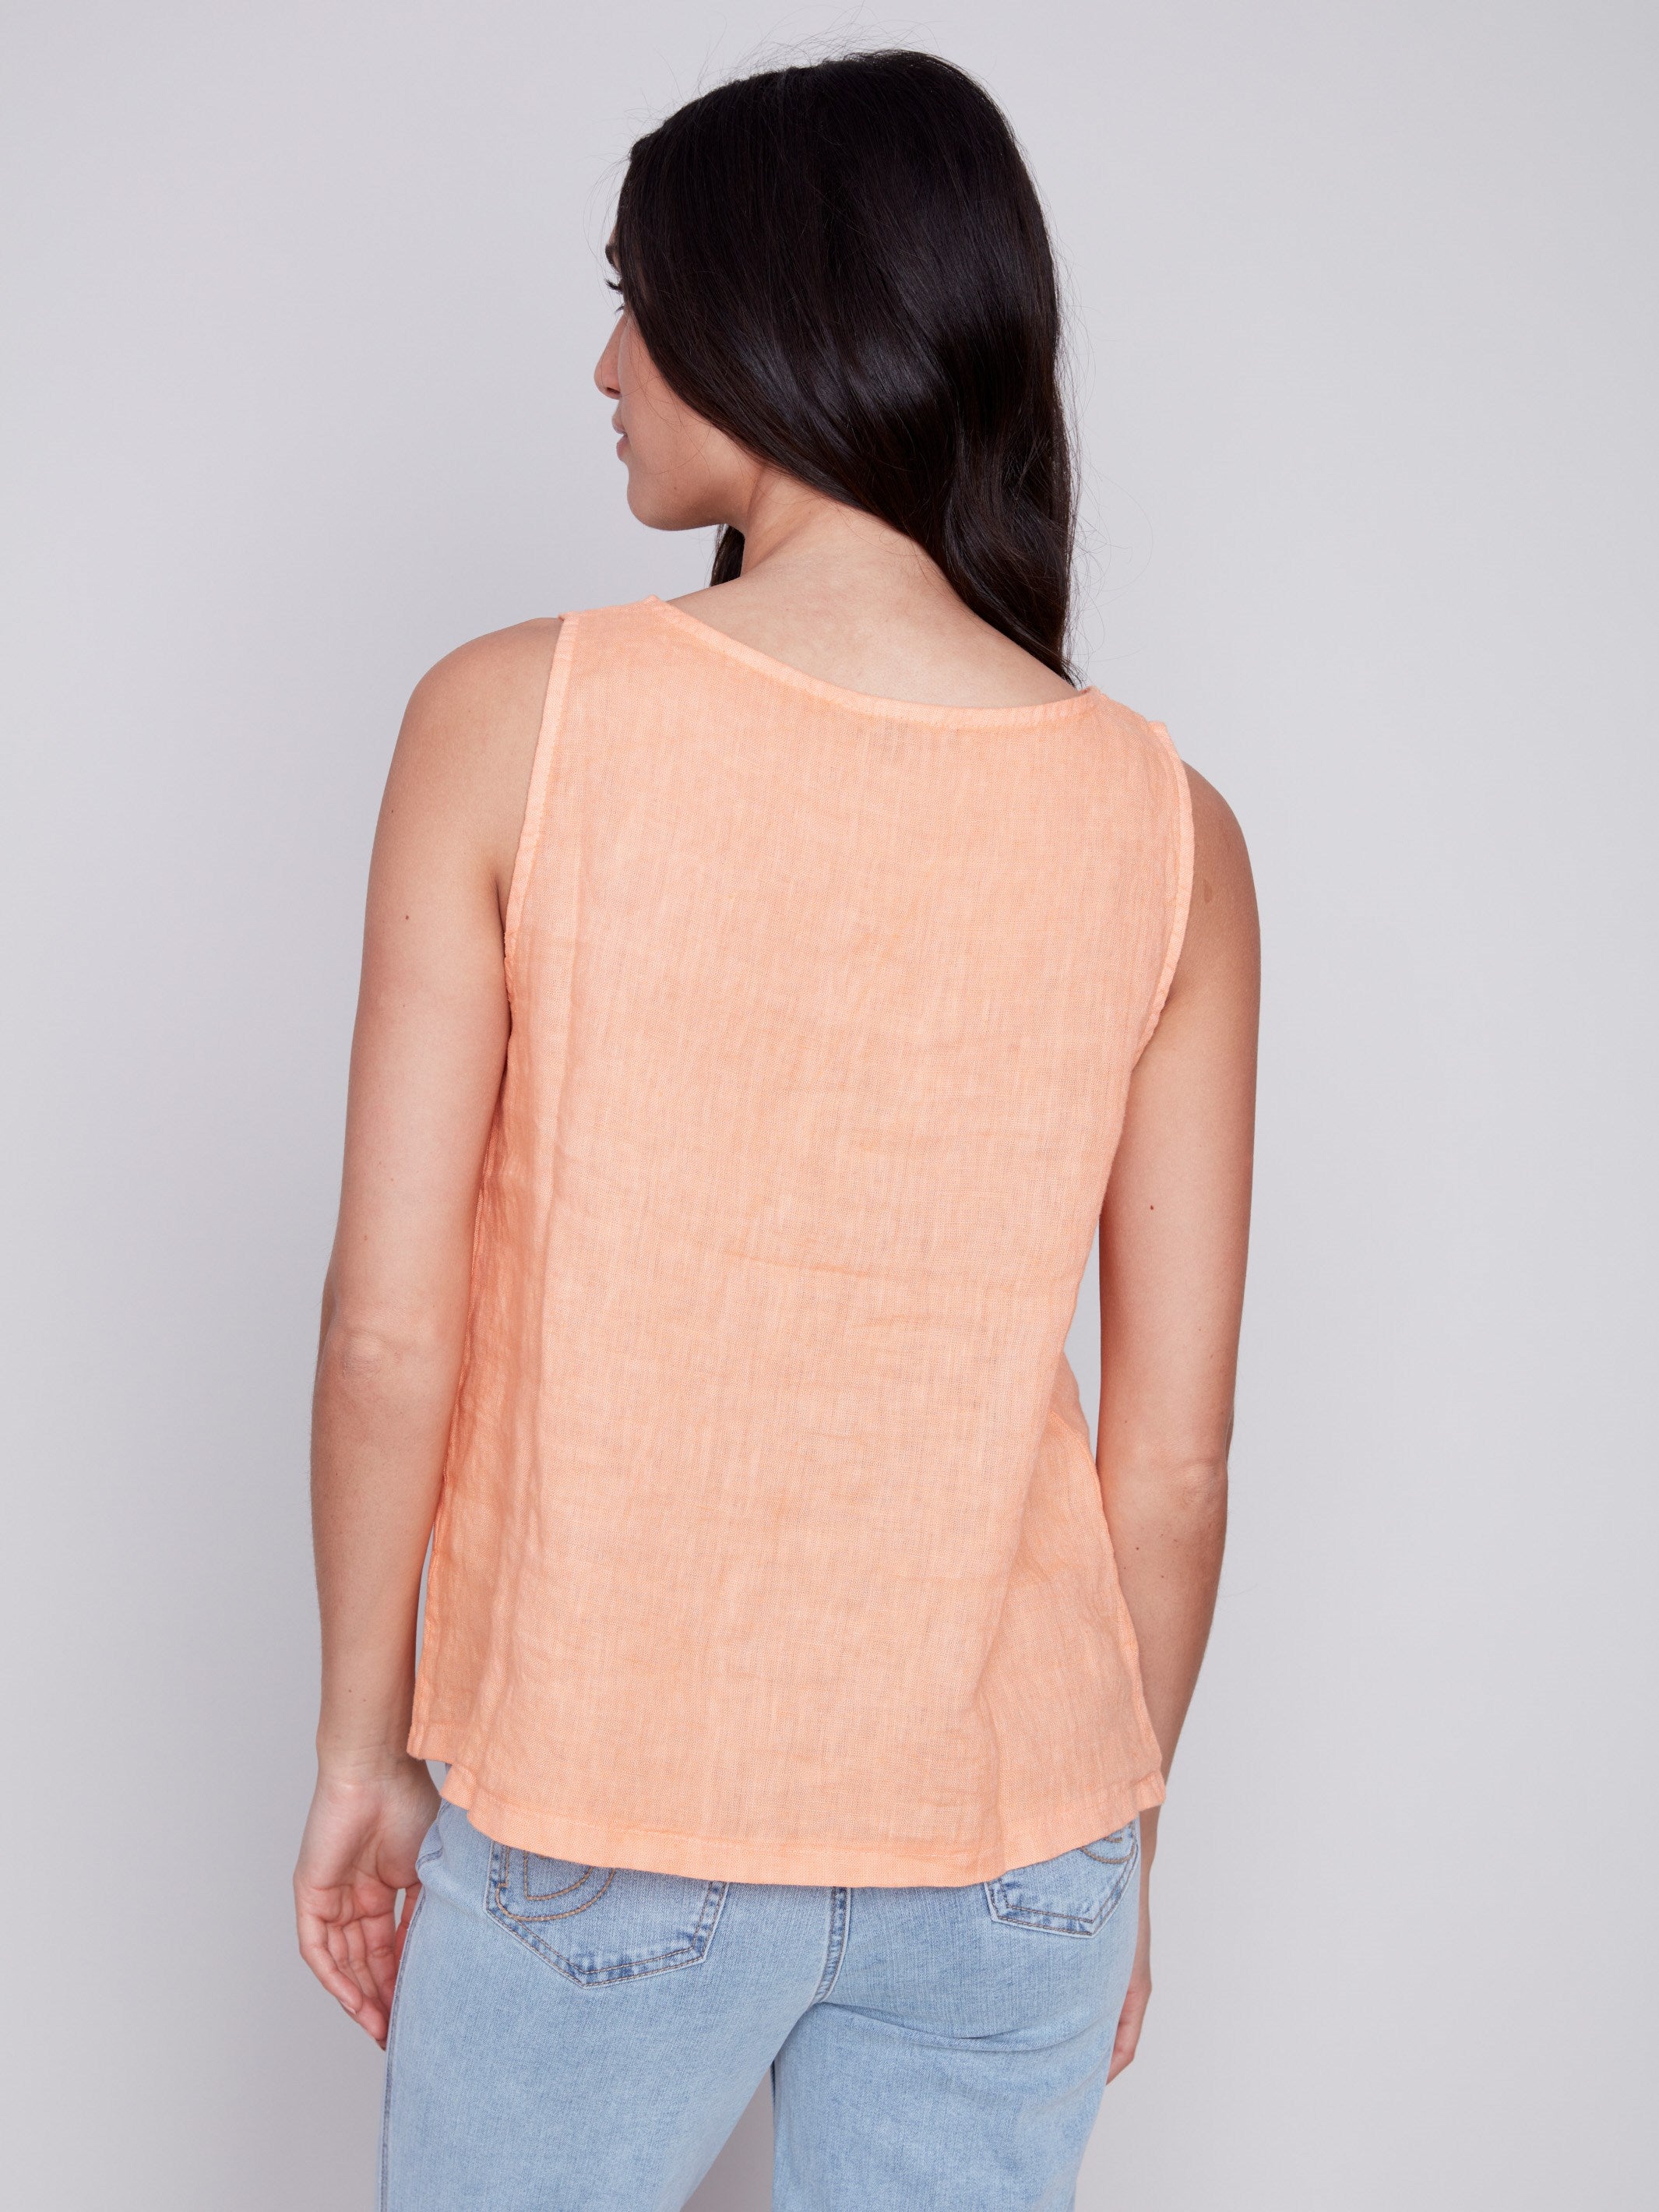 Sleeveless Linen Top with Slit - Tangerine - Charlie B Collection Canada - Image 4